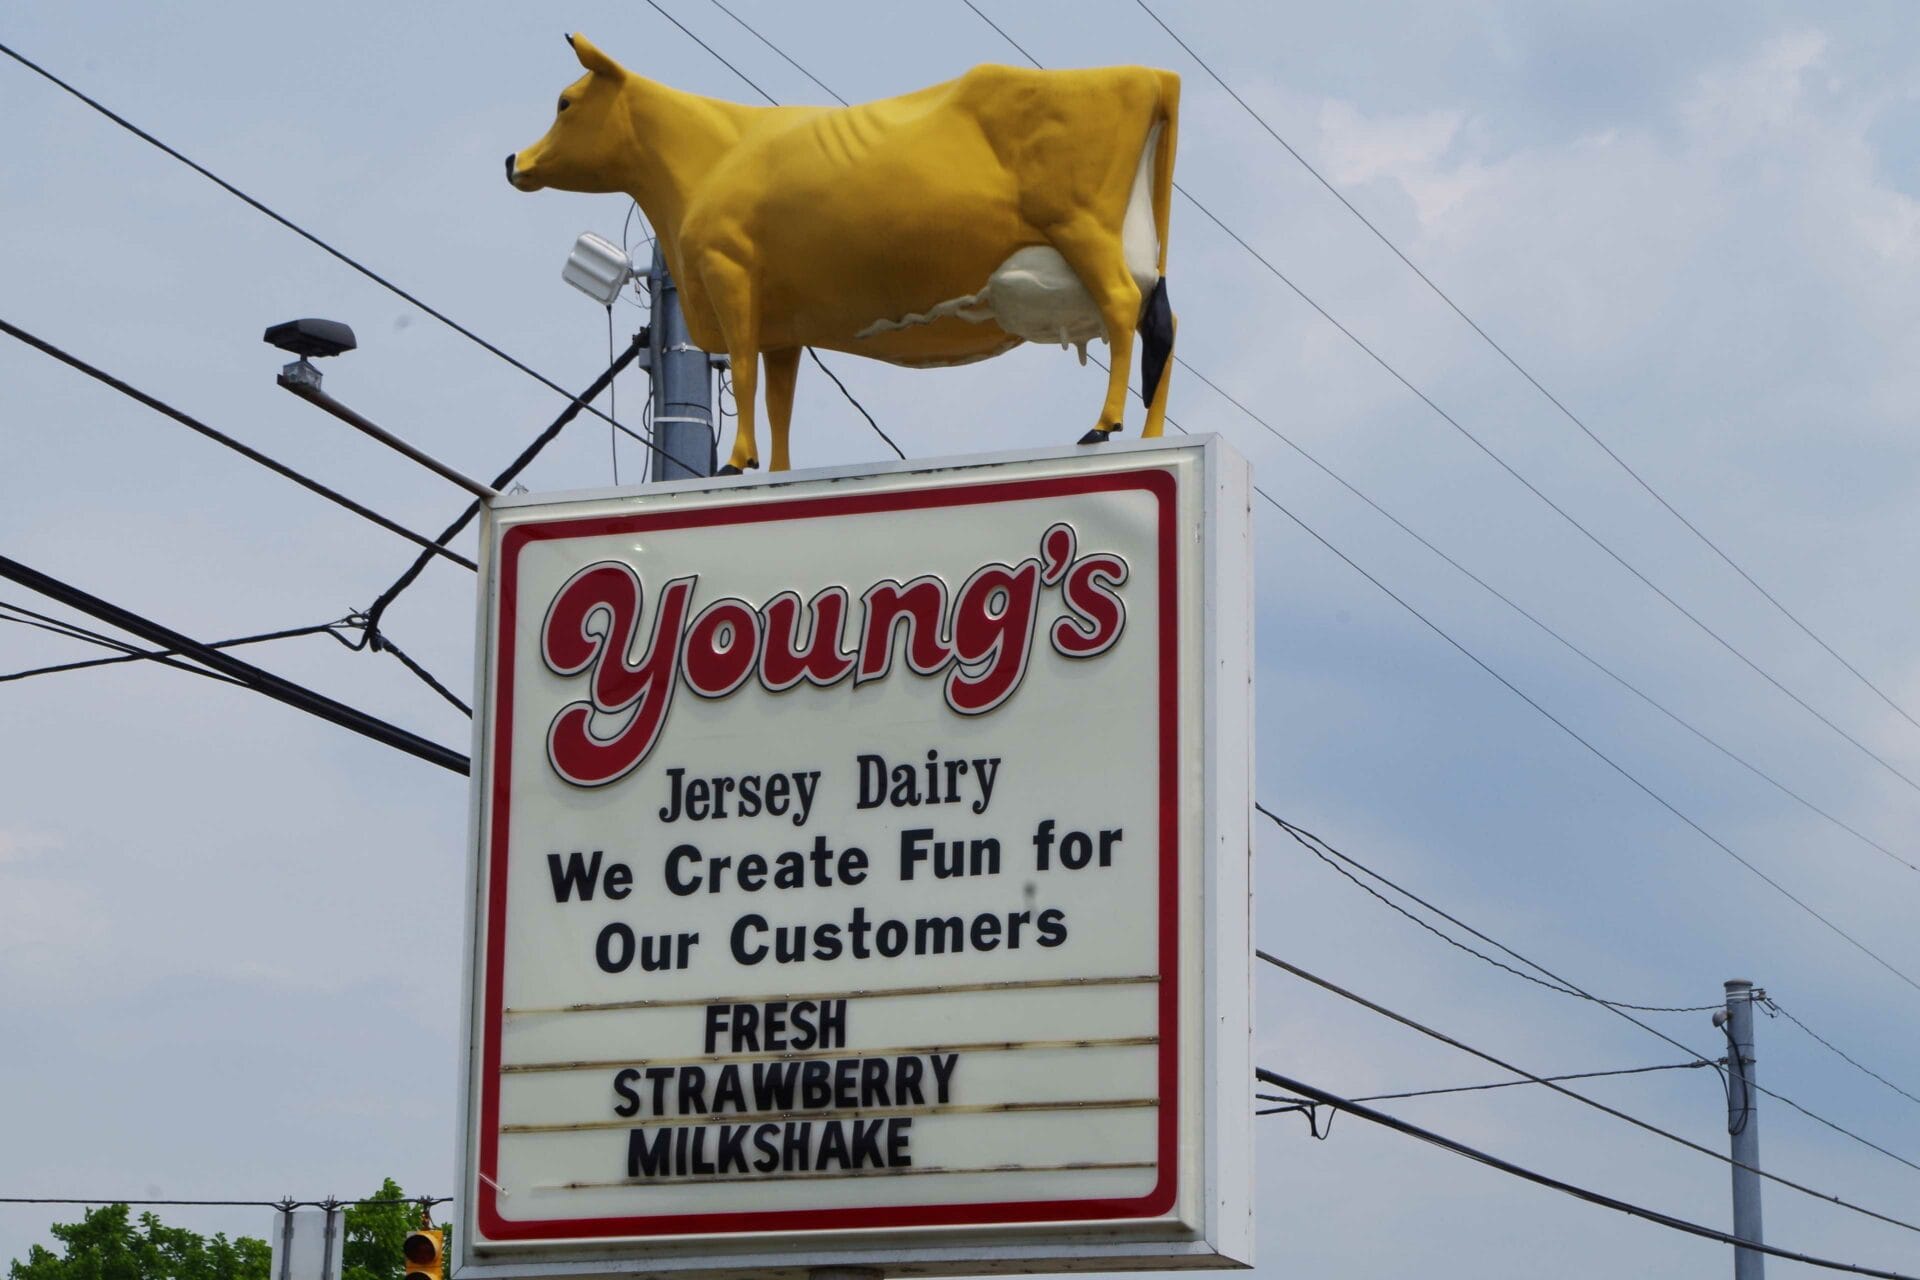 Outdoor Sign for Youngs Jersey Dairy with cow statue on top